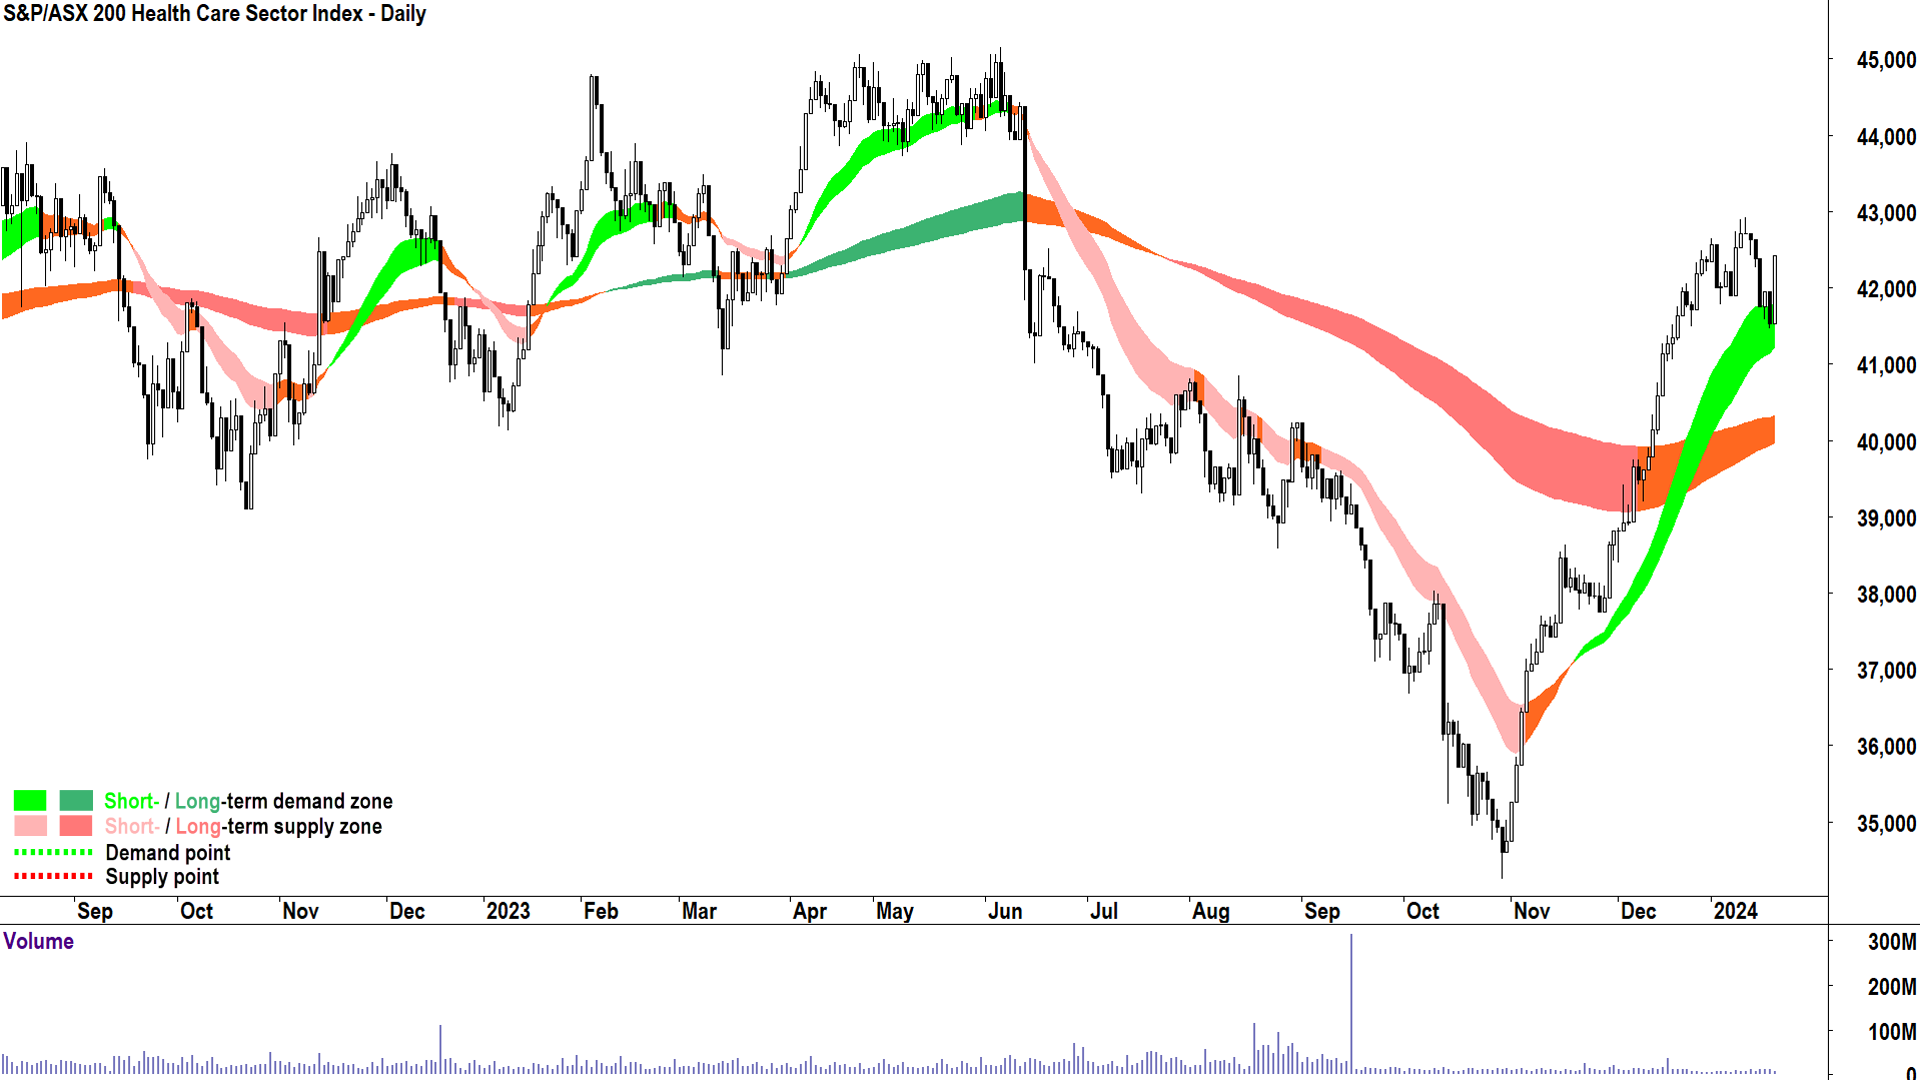 The Healthcare sector is showing a strong short term uptrend